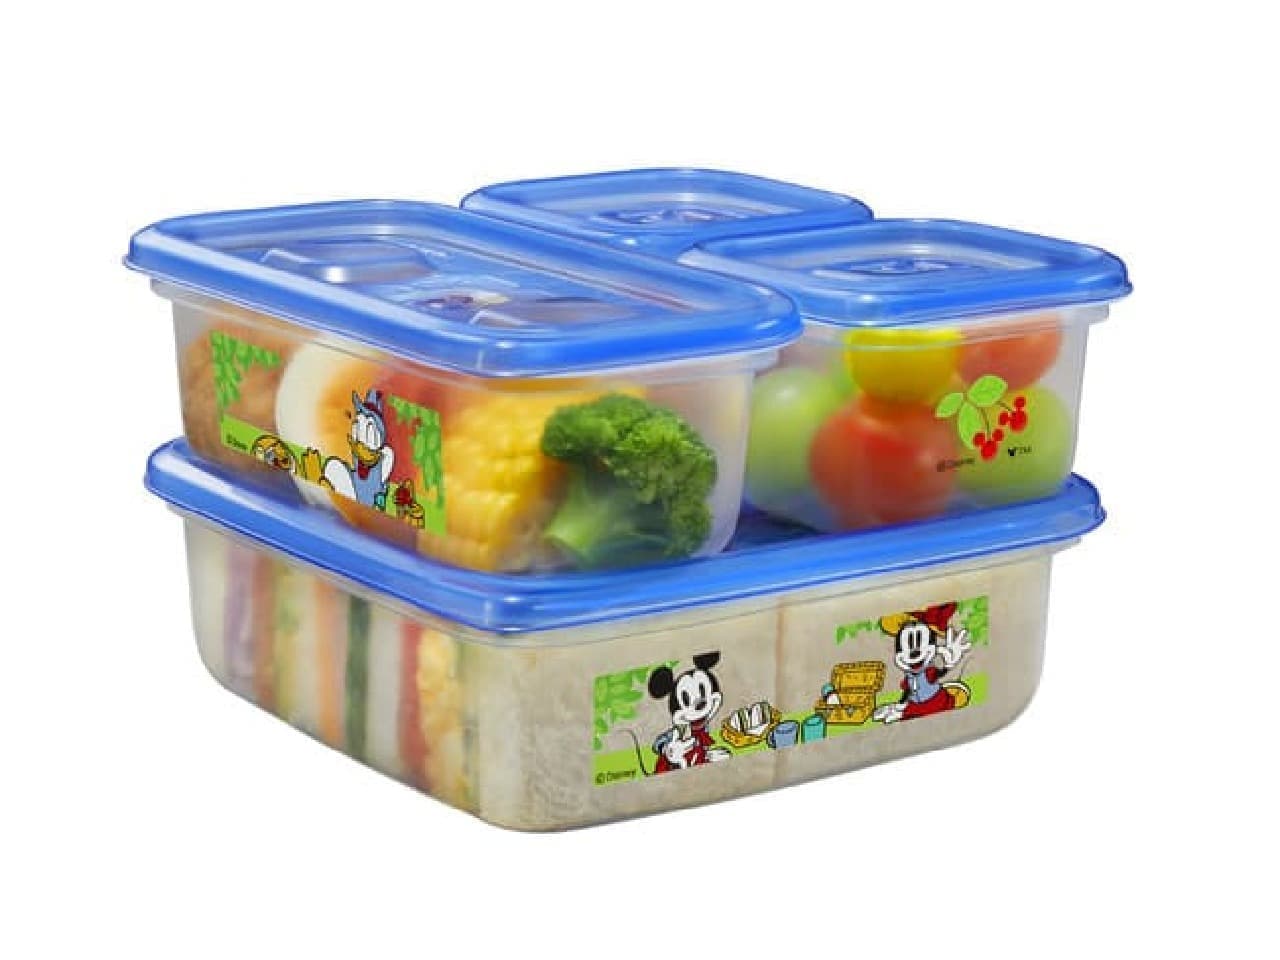 Ziploc Container x Disney 2022 Spring Design -- Mickeys enjoying the outdoors! Also for lunchboxes